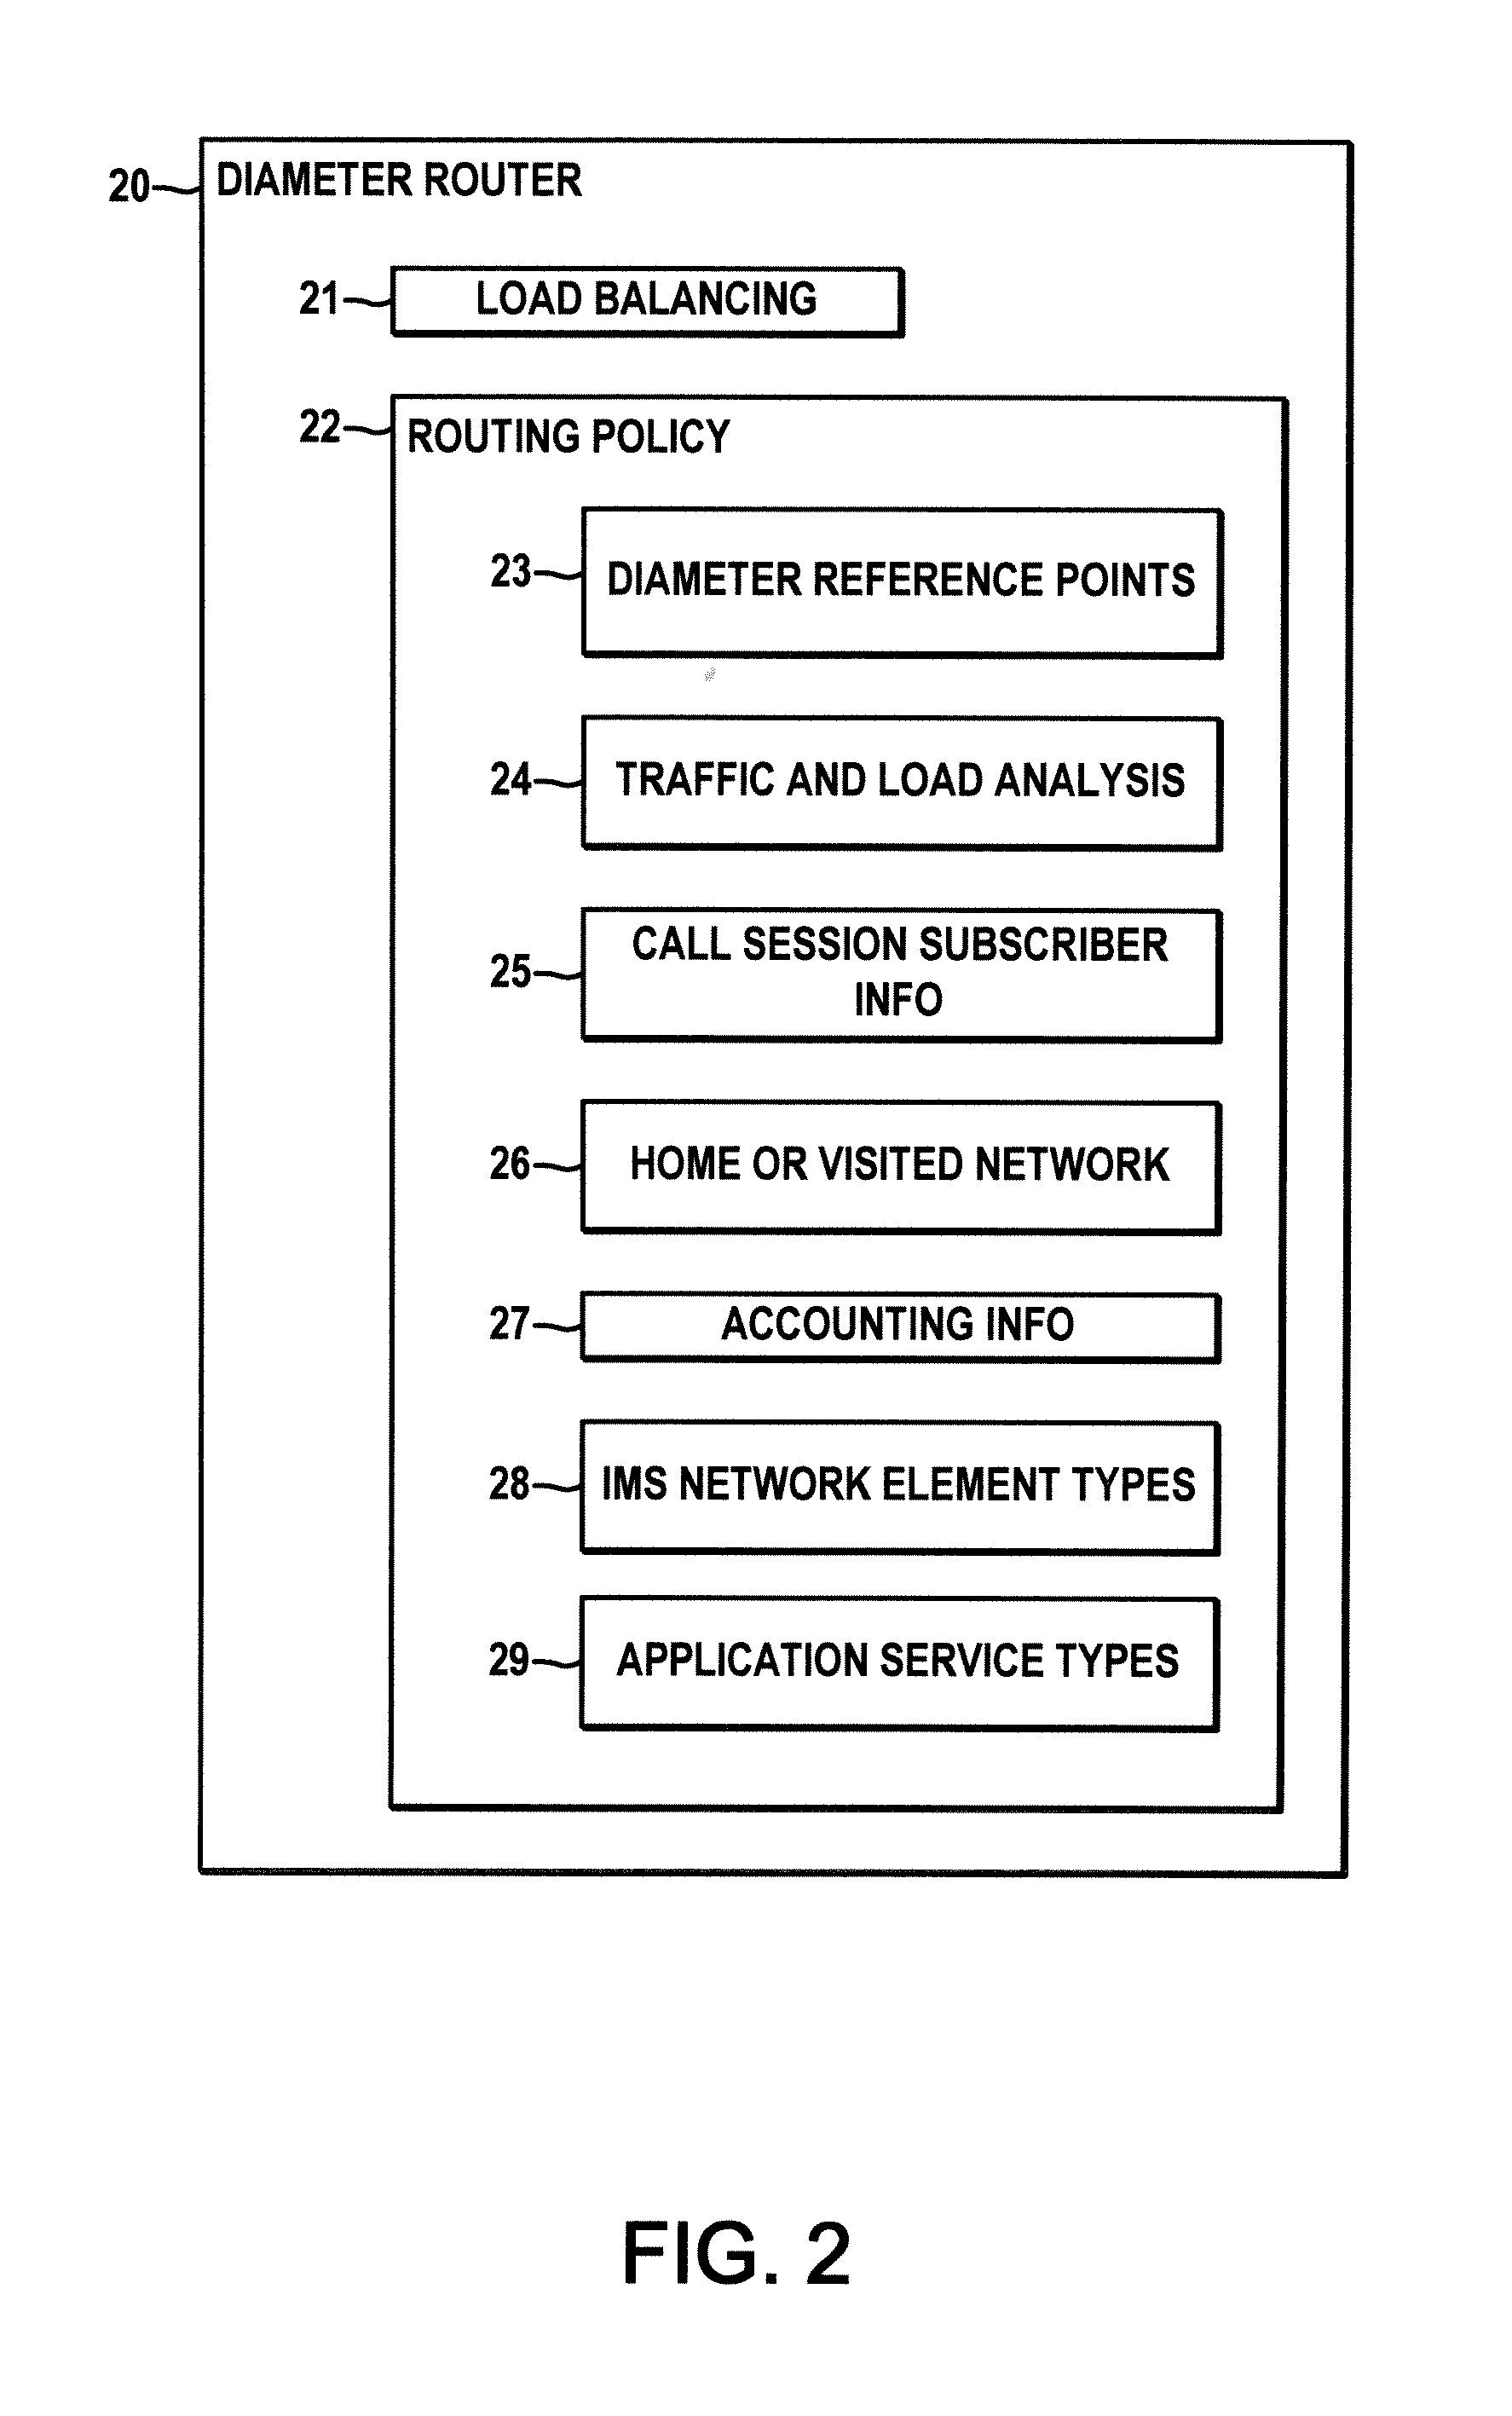 IMS diameter router with load balancing